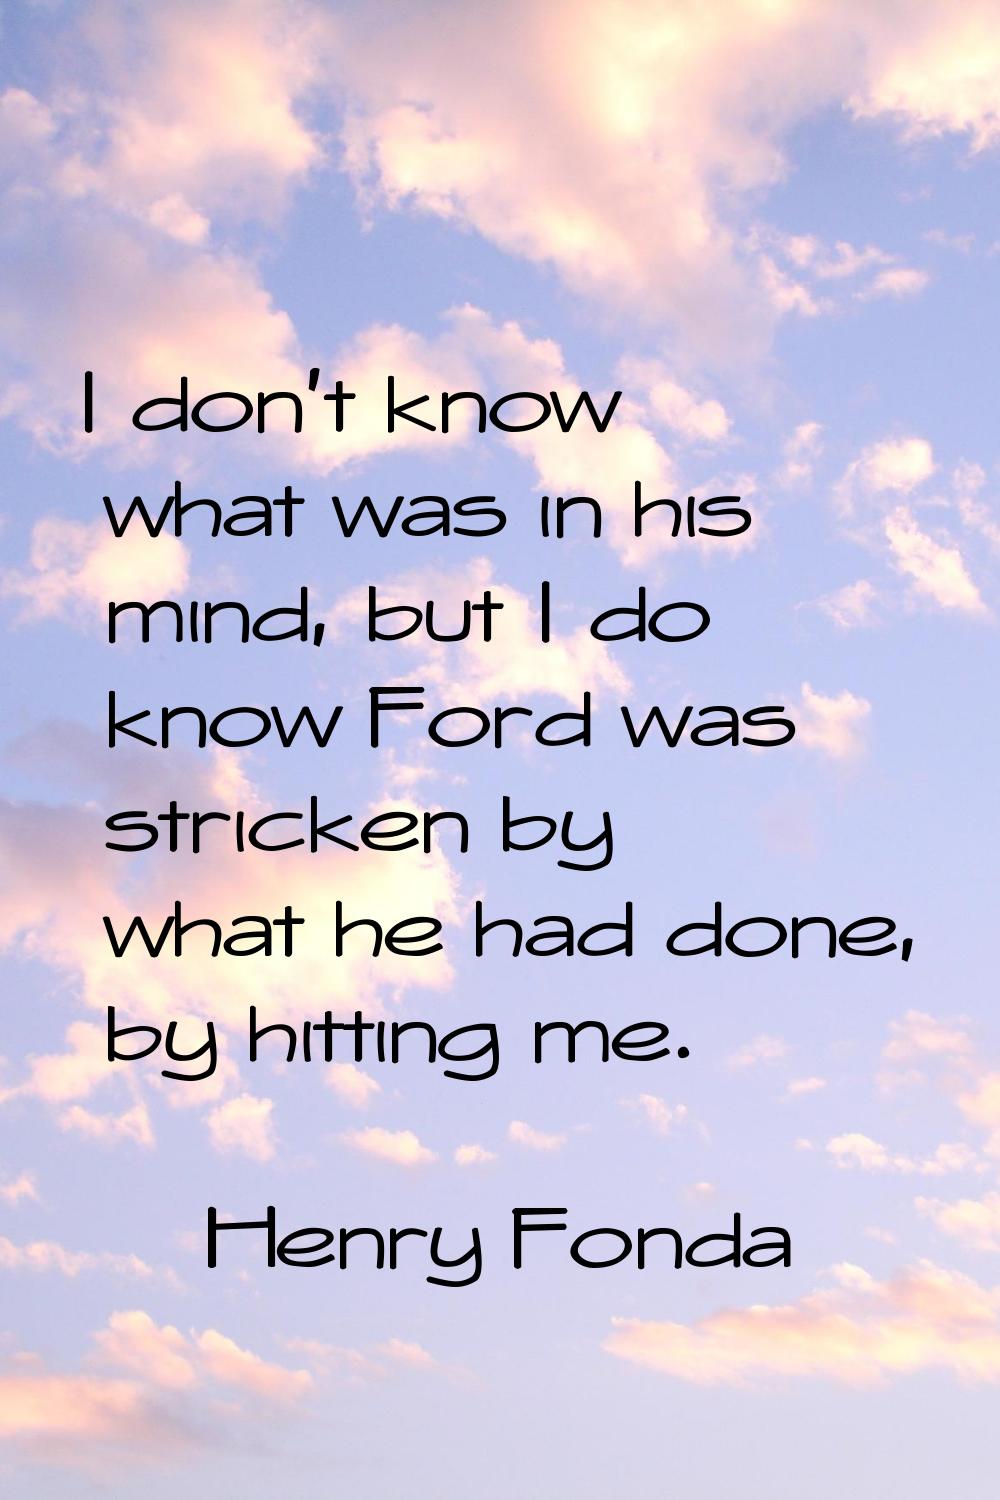 I don't know what was in his mind, but I do know Ford was stricken by what he had done, by hitting 